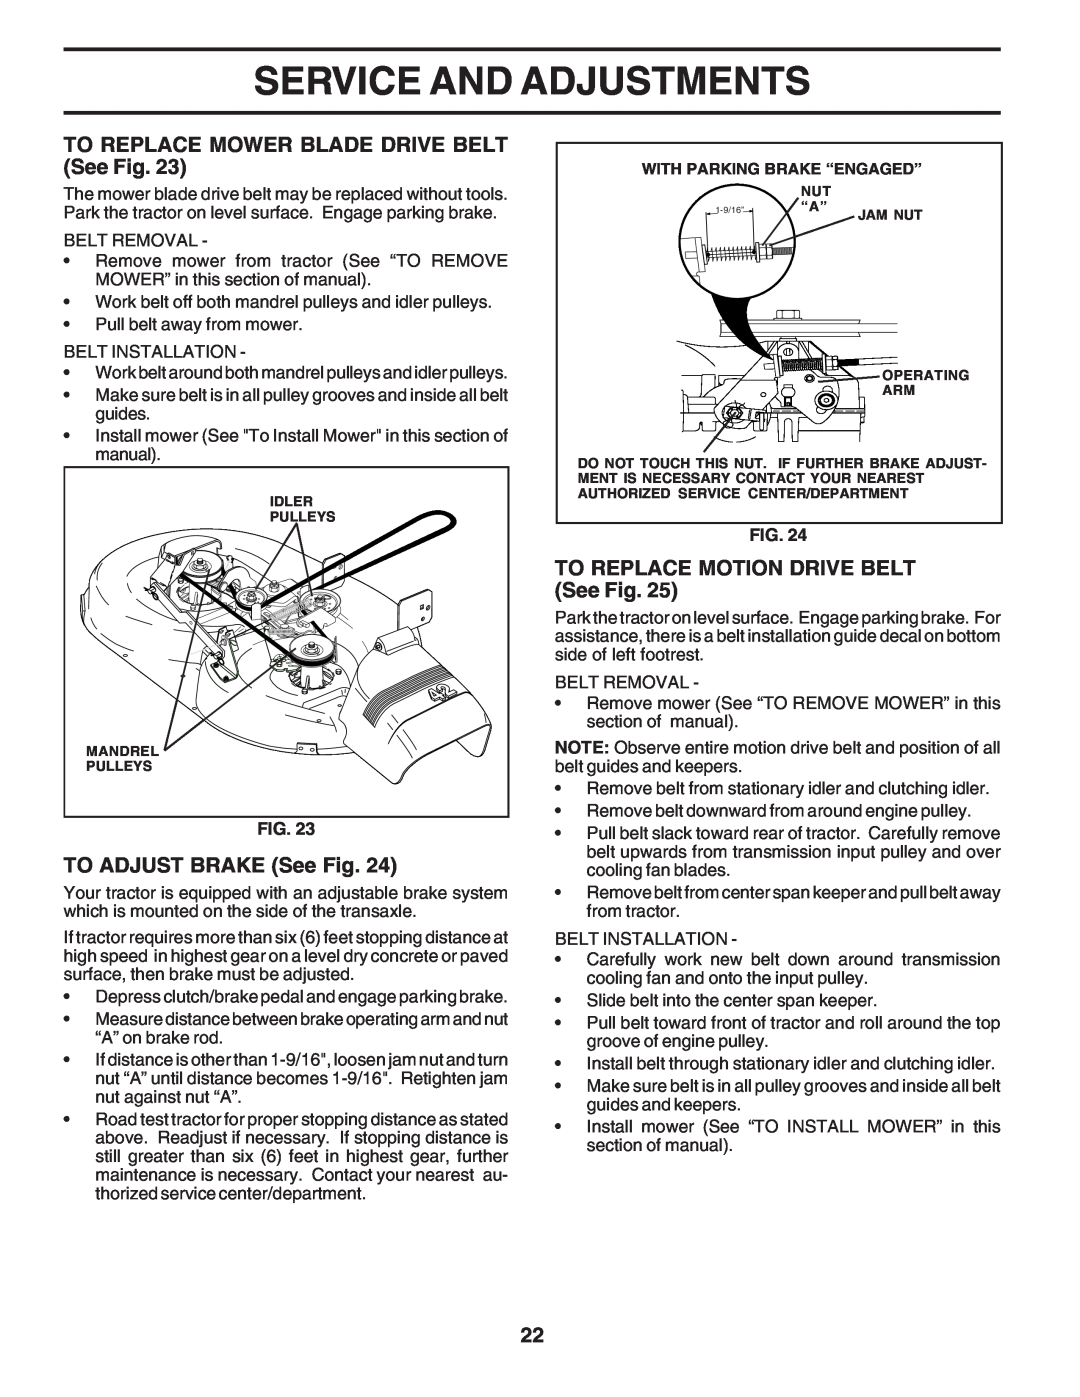 Poulan PPR20H42STB owner manual TO REPLACE MOWER BLADE DRIVE BELT See Fig, TO ADJUST BRAKE See Fig, Service And Adjustments 